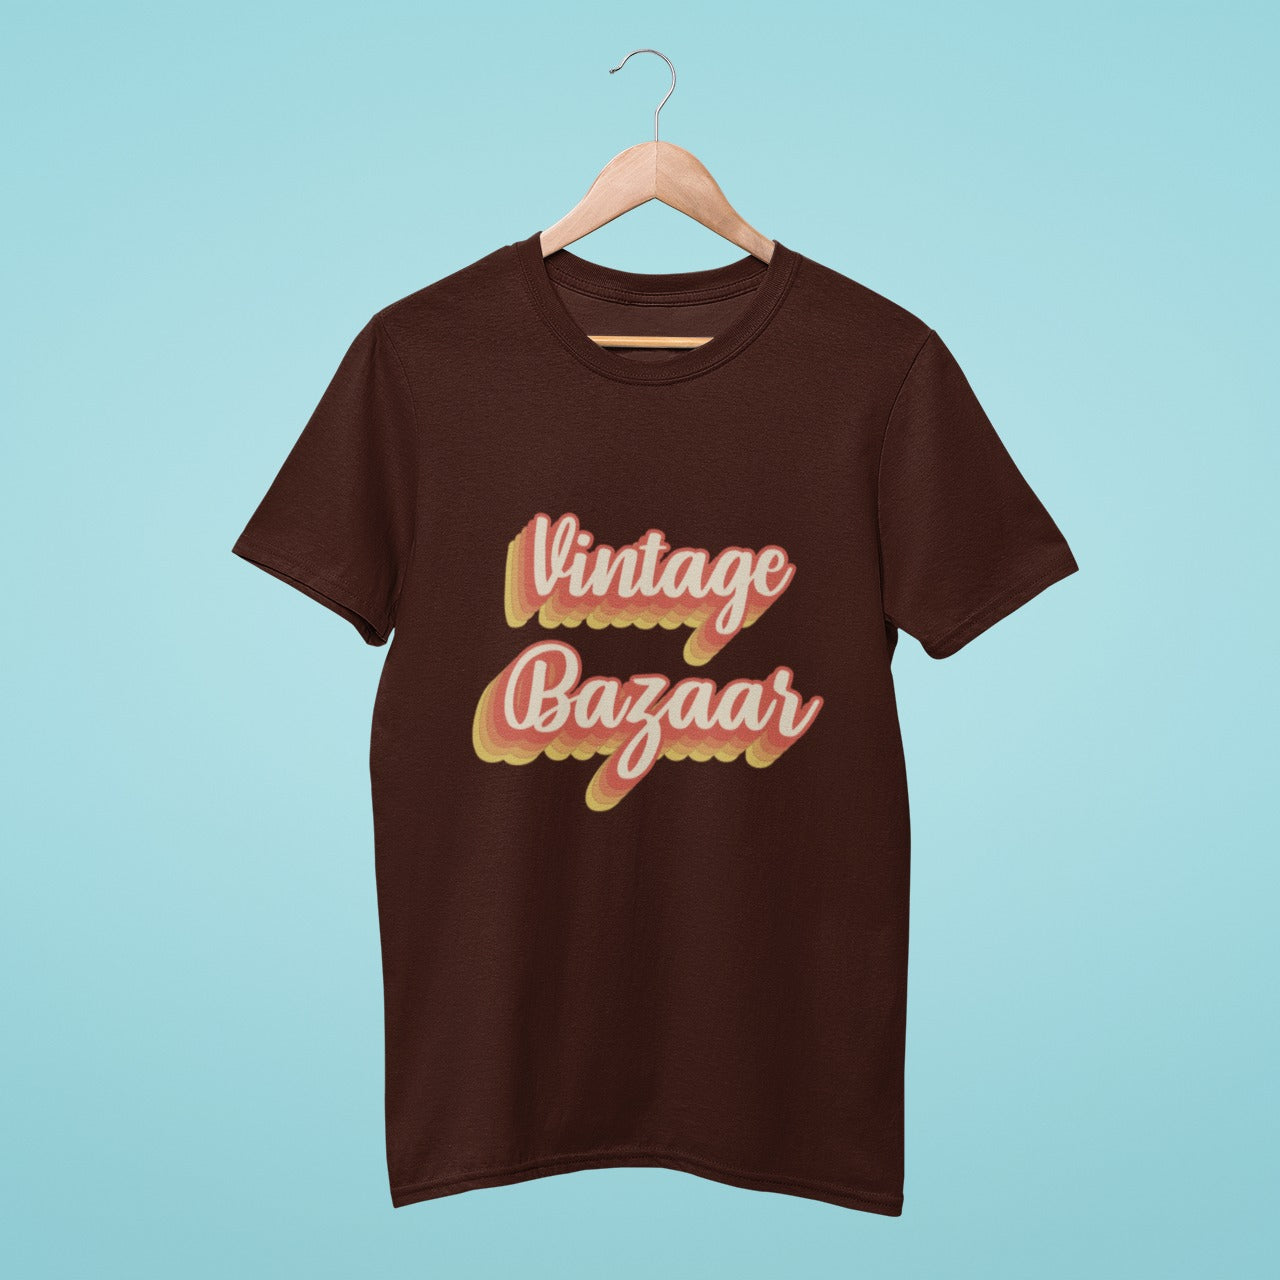 Introducing our Vintage Bazaar t-shirt! With its stylish cursive font and retro pop design, it's the perfect way to showcase your love for vintage fashion. Whether you're hitting up a flea market or just running errands, this t-shirt will keep you looking chic and stylish all day long. Don't miss out on this must-have addition to your wardrobe!